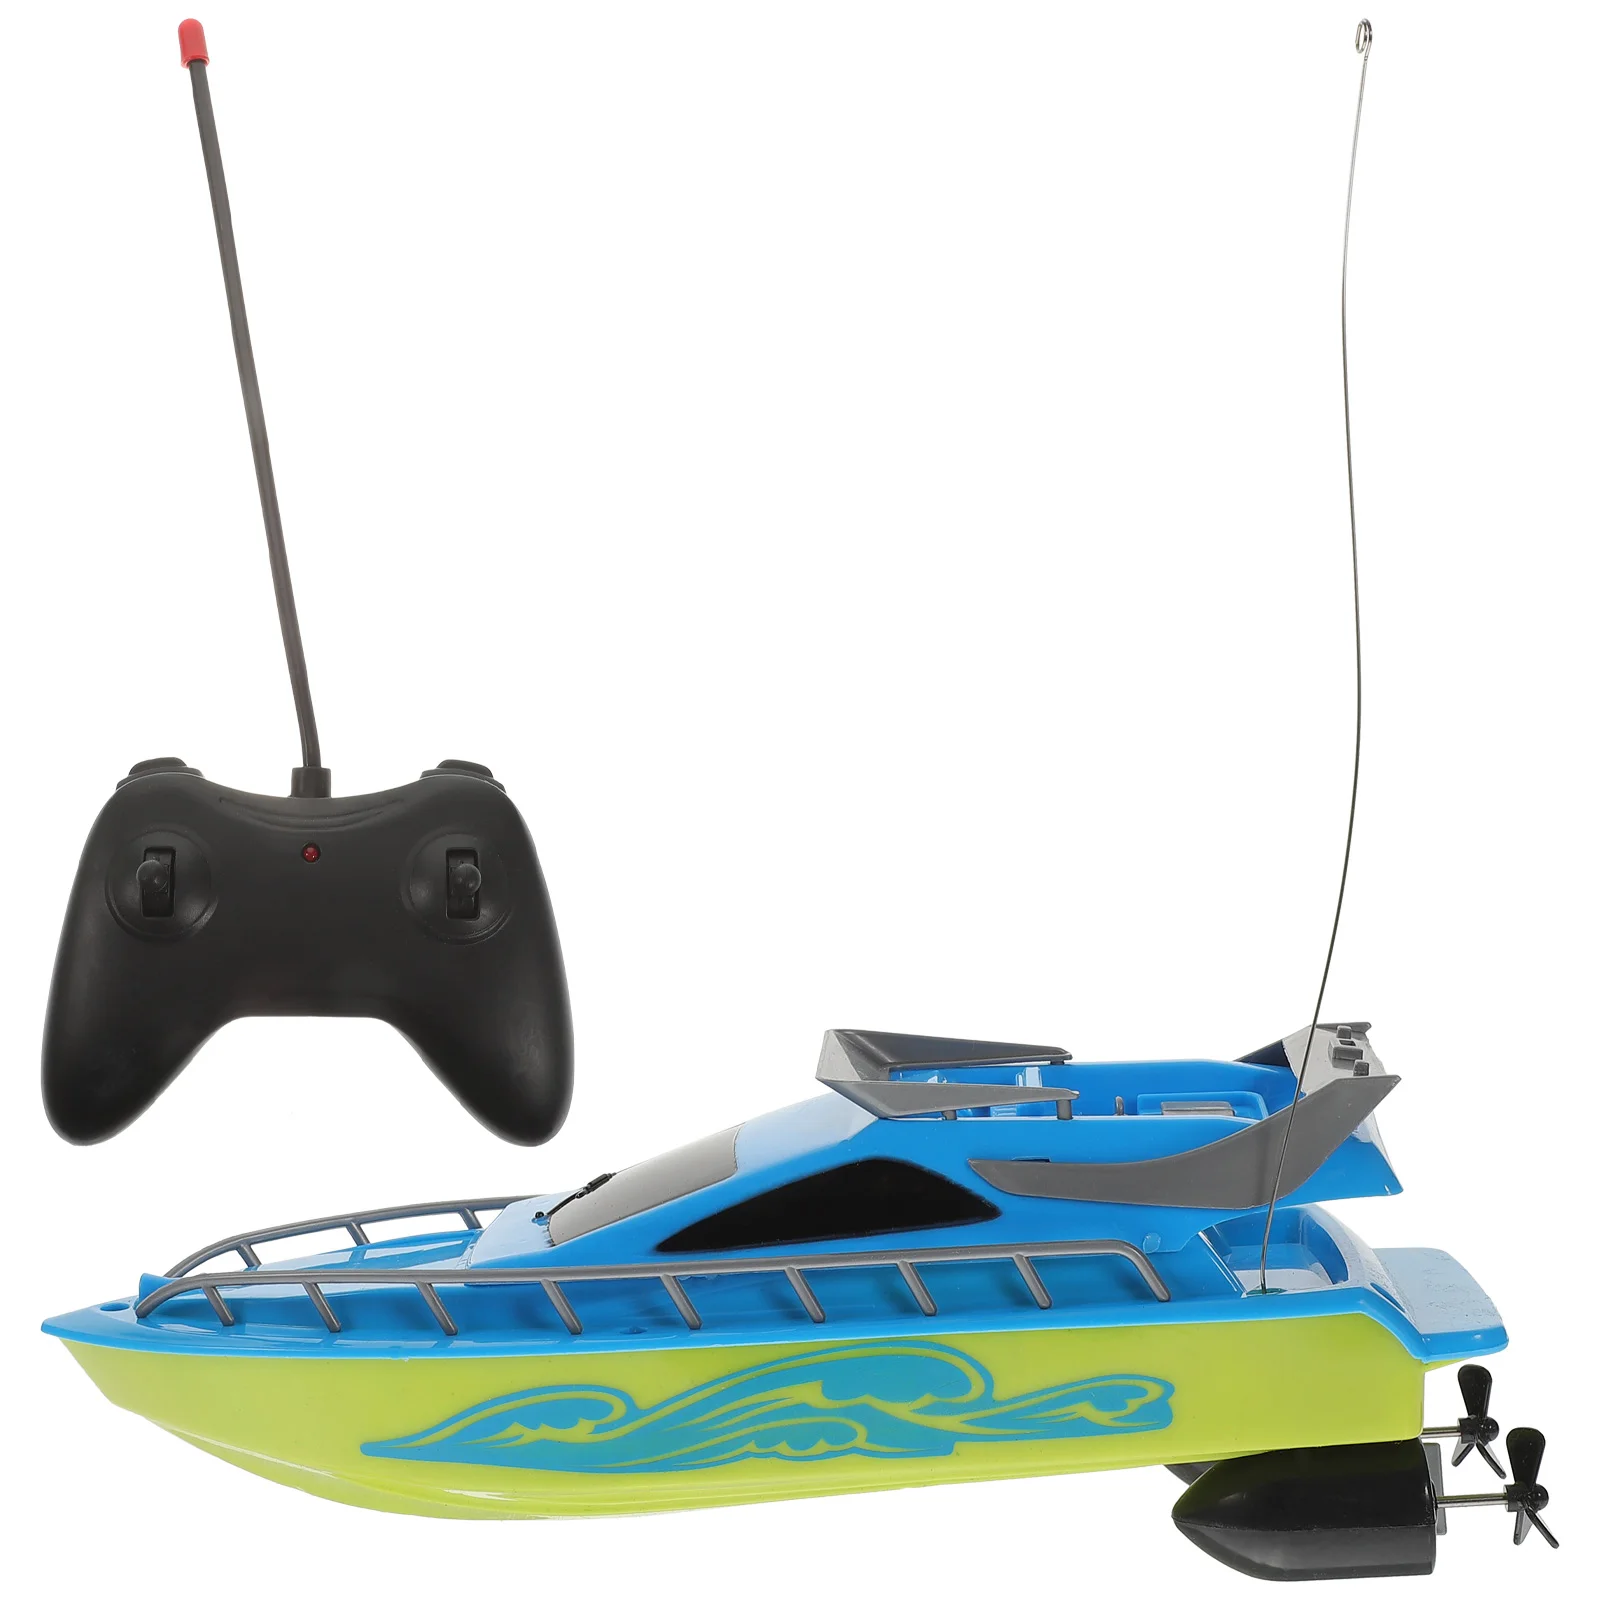 

Remote Control Boat Rc Boats Adults Electric Speedboat Toy Pool Portable Speeding Plastic Child Kids Plaything Water